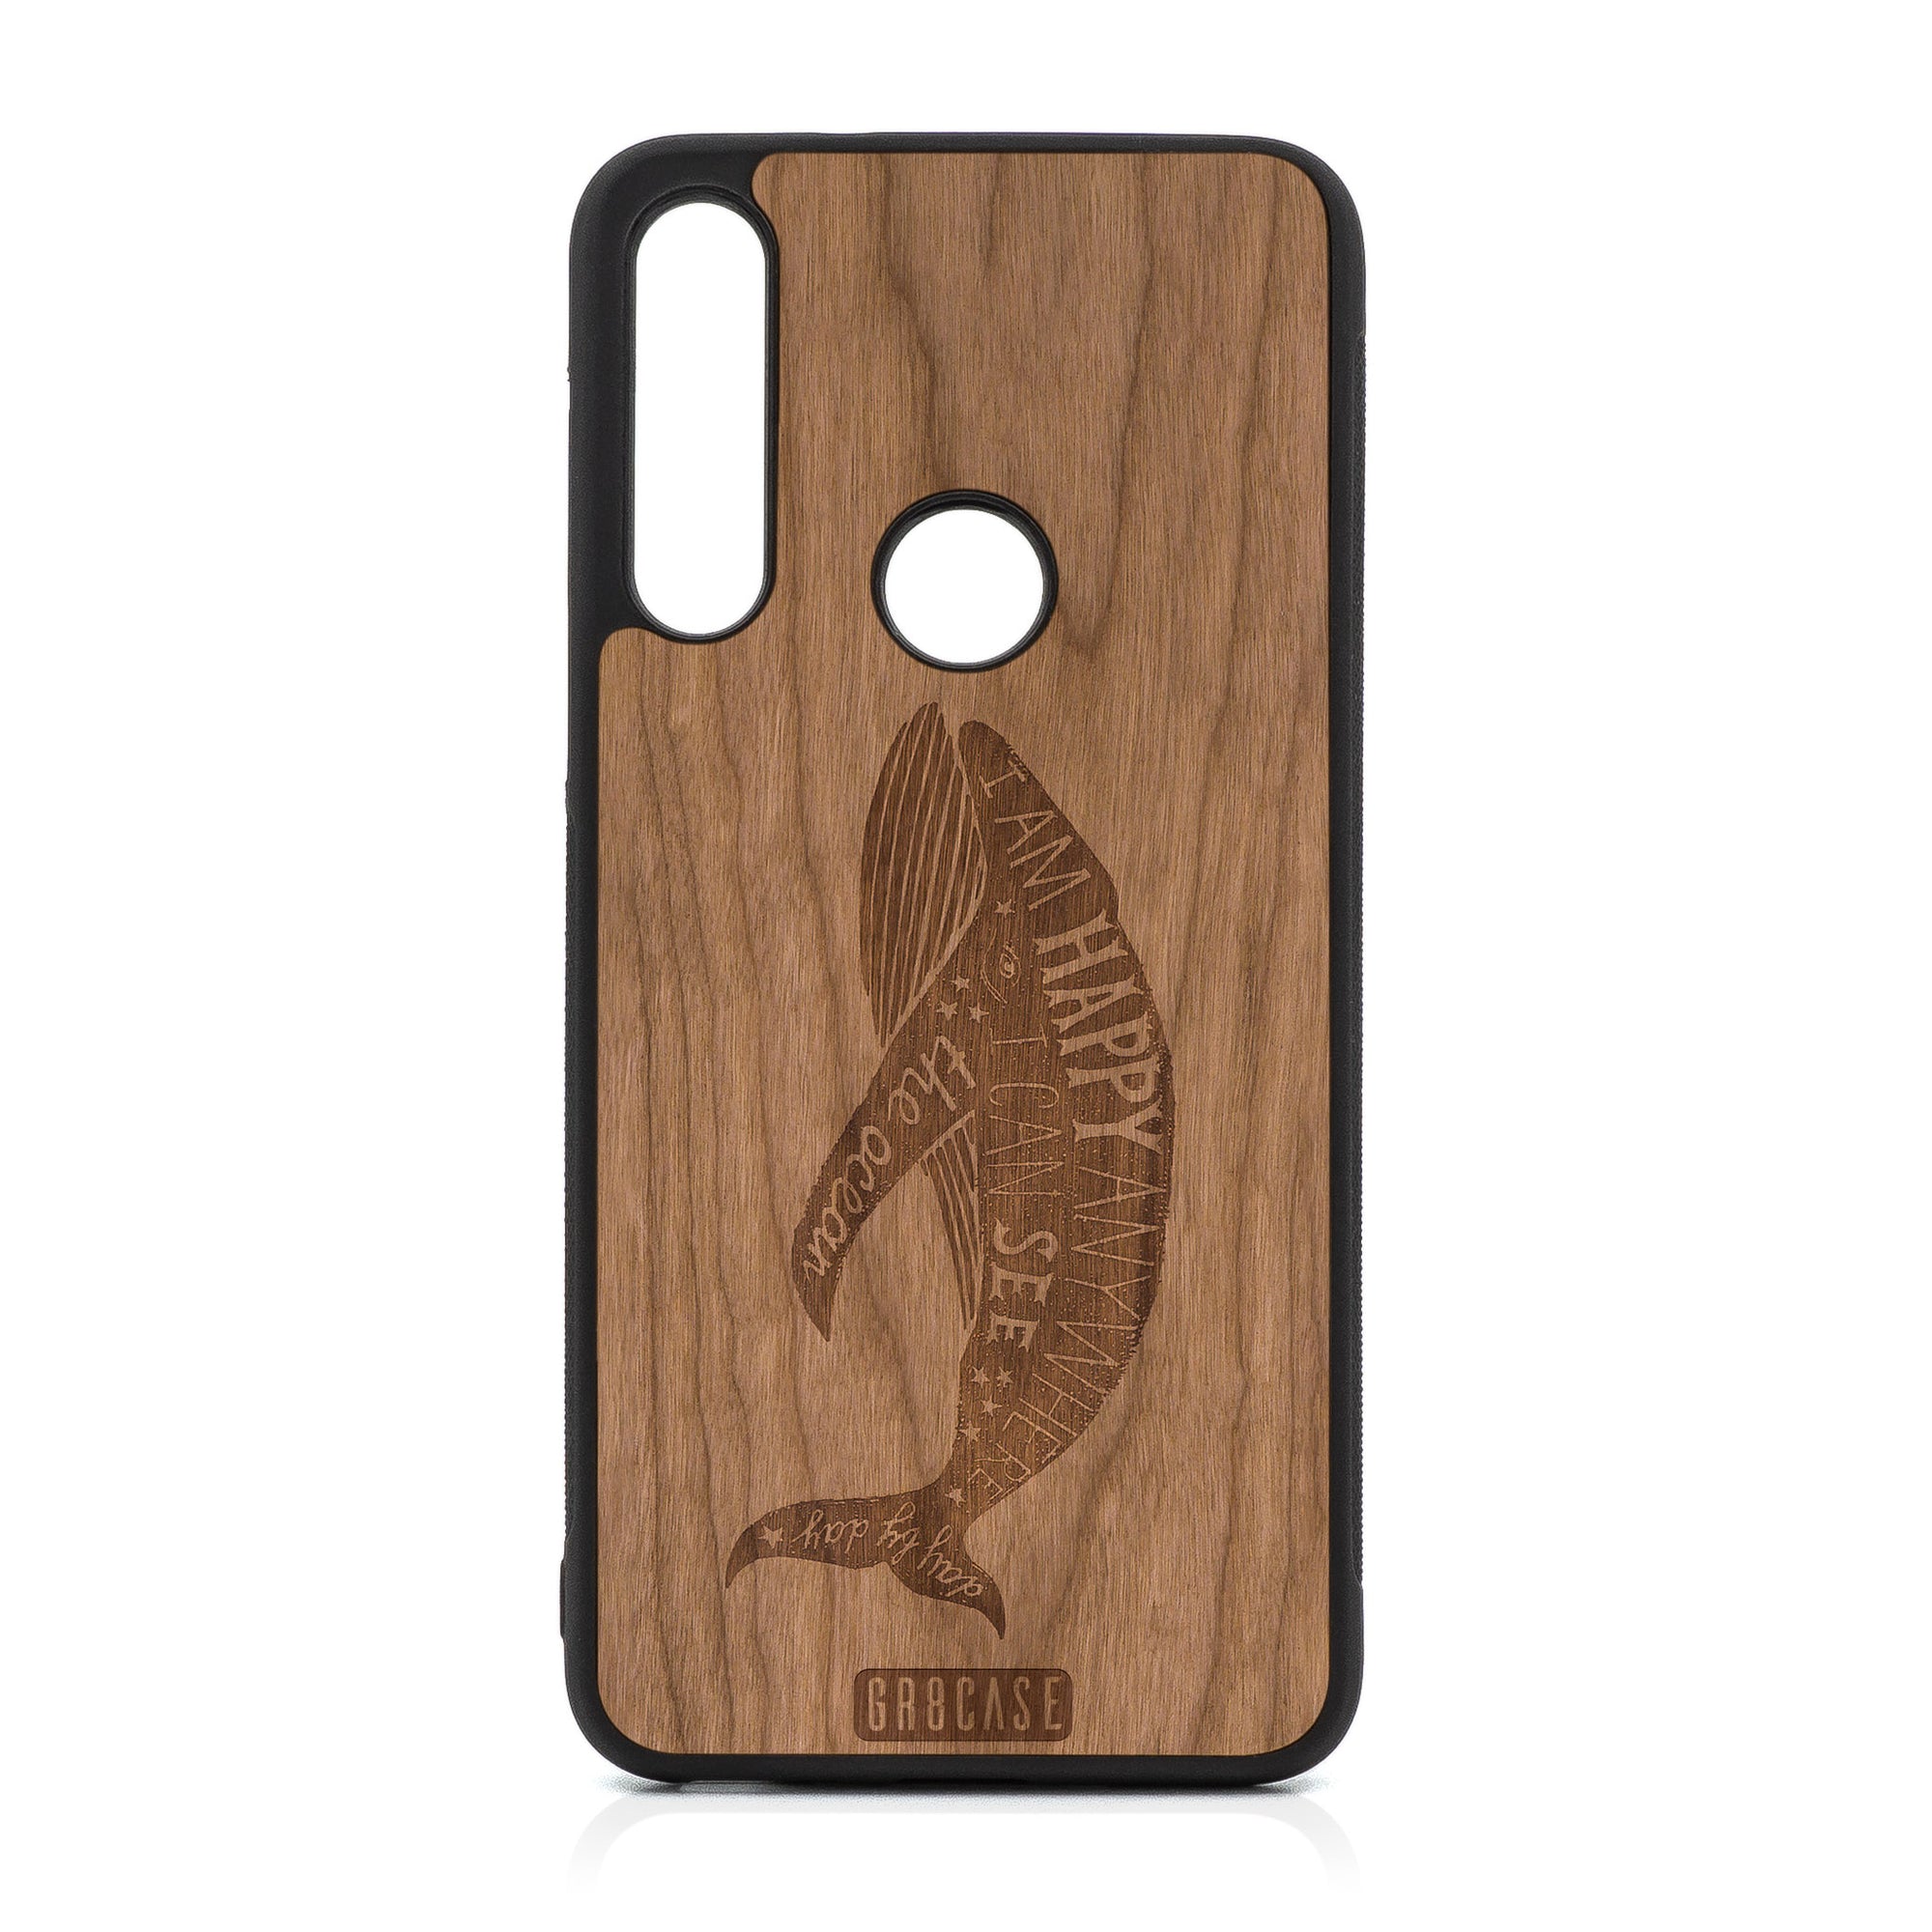 I'm Happy Anywhere I Can See The Ocean (Whale) Design Wood Case For Moto G Fast